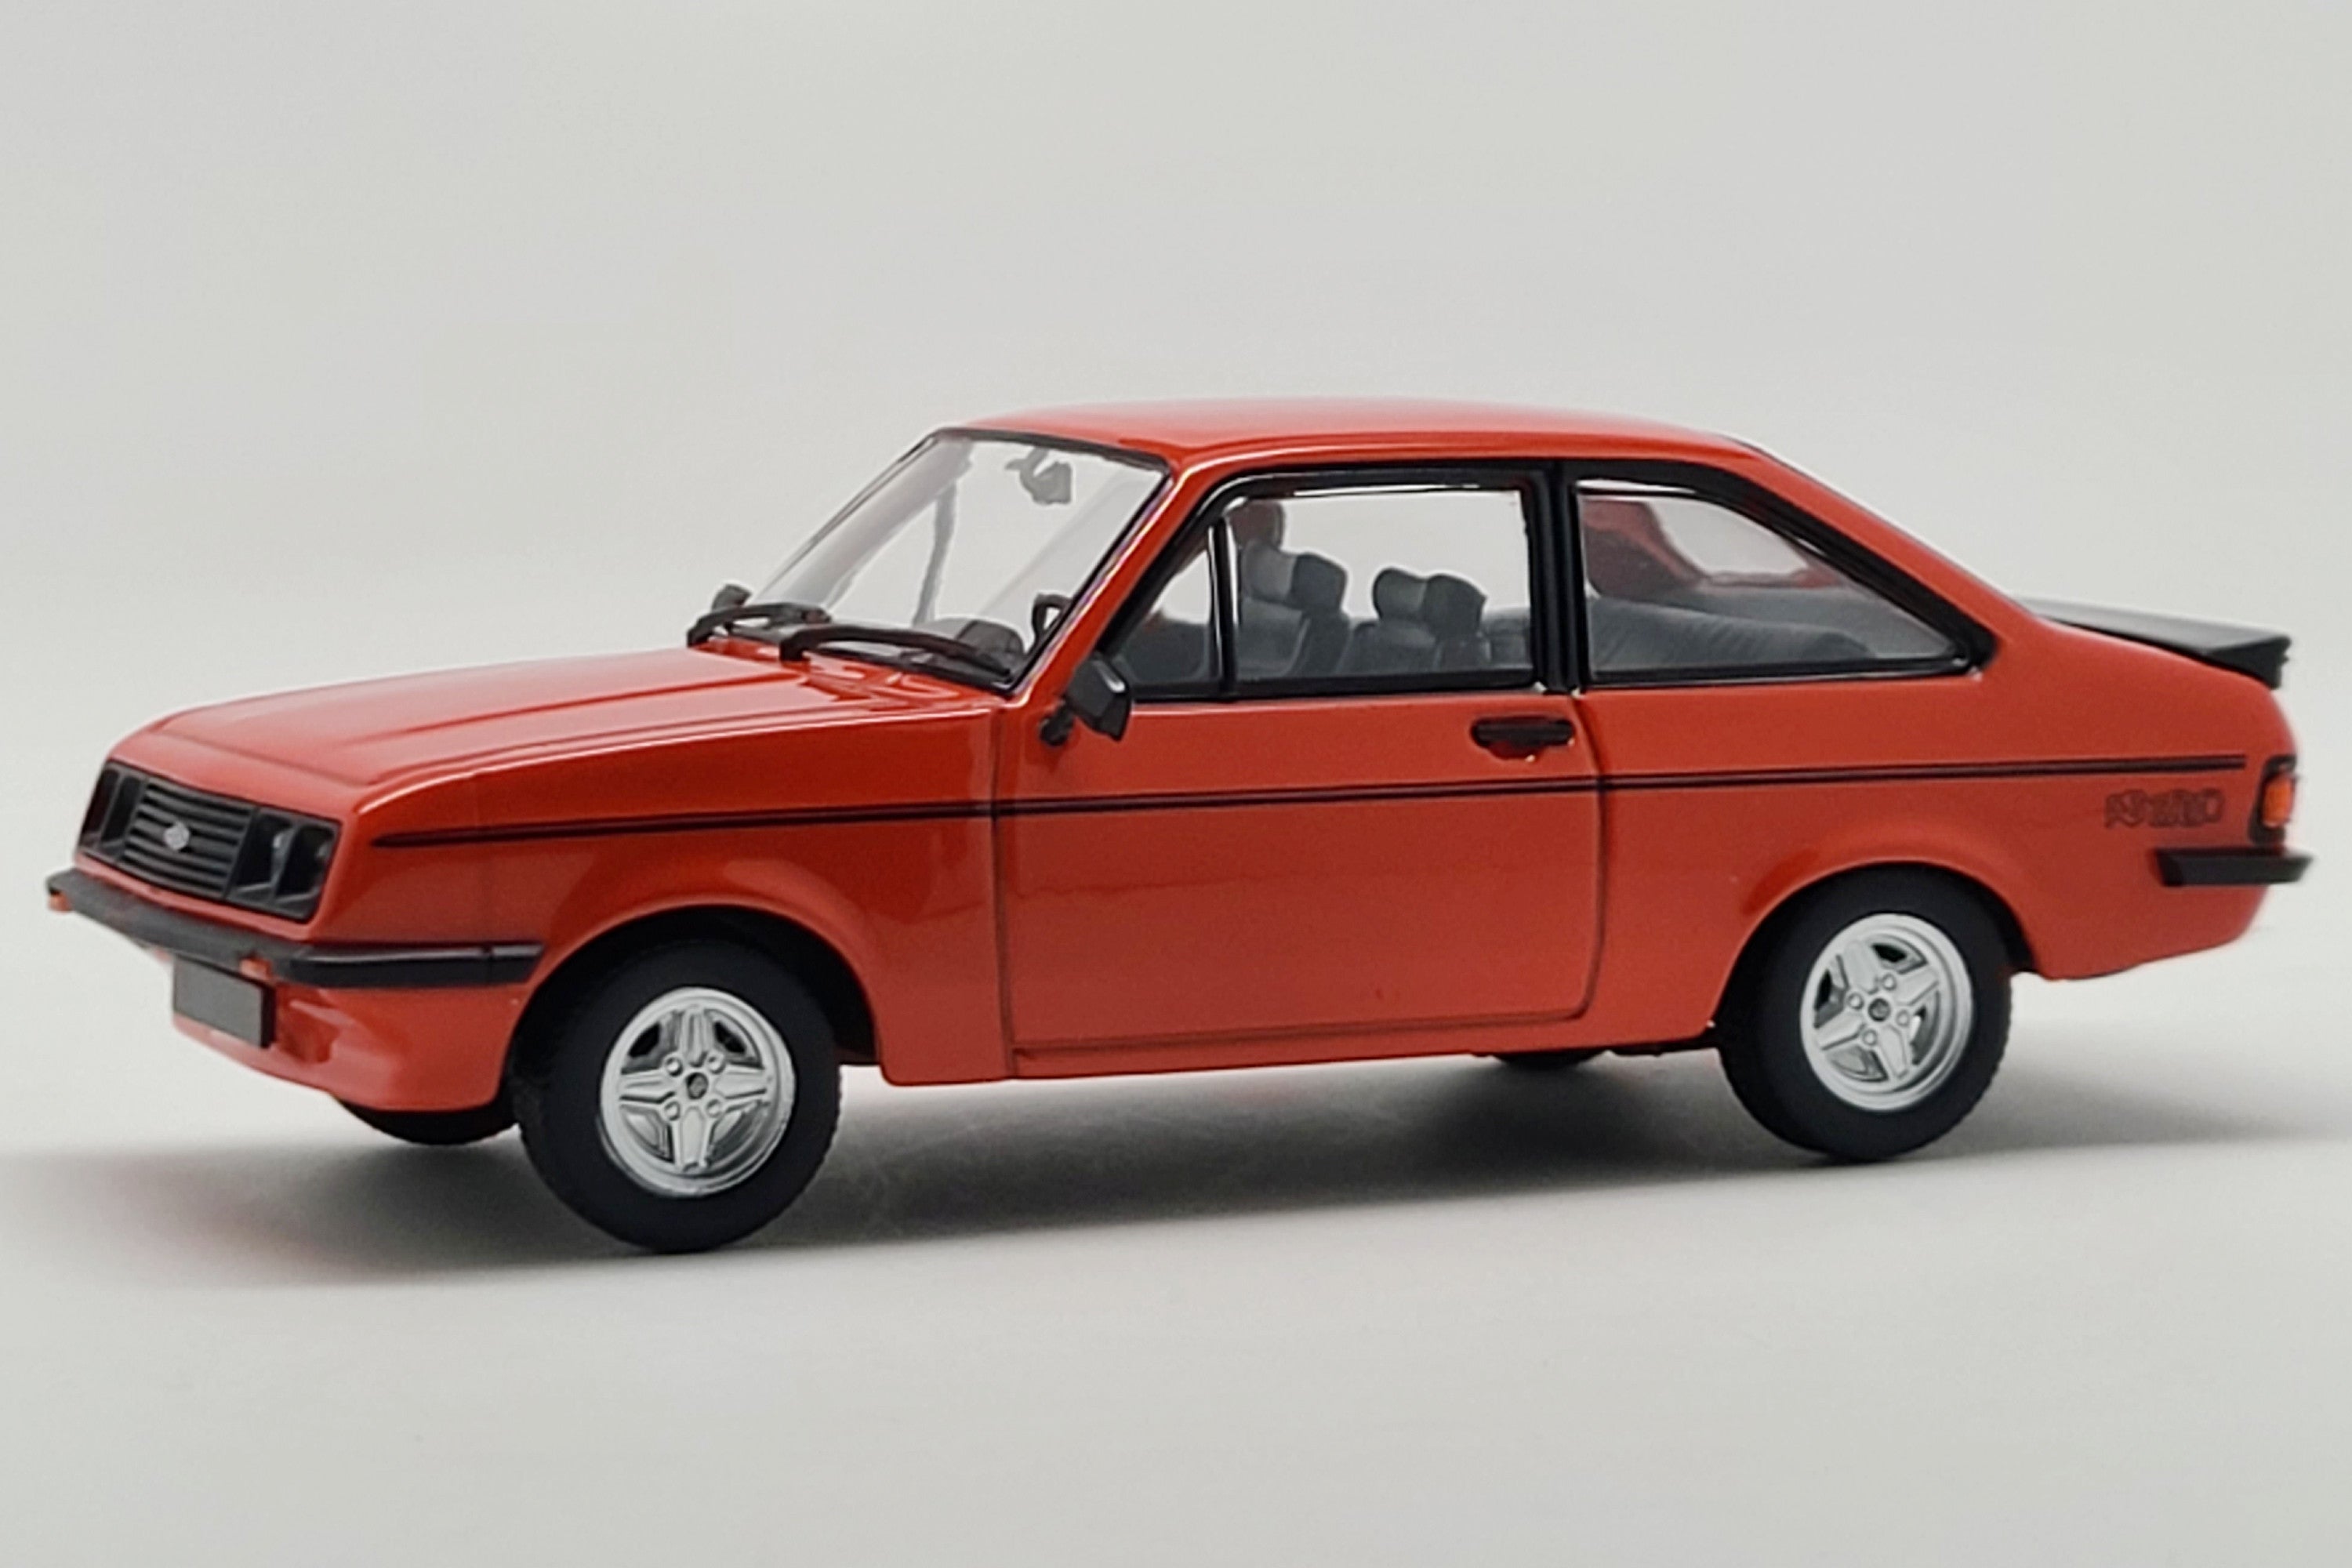 Ford Escort RS2000 (1976) | 1:43 Scale Diecast Model Car by Maxichamps | Red Variant